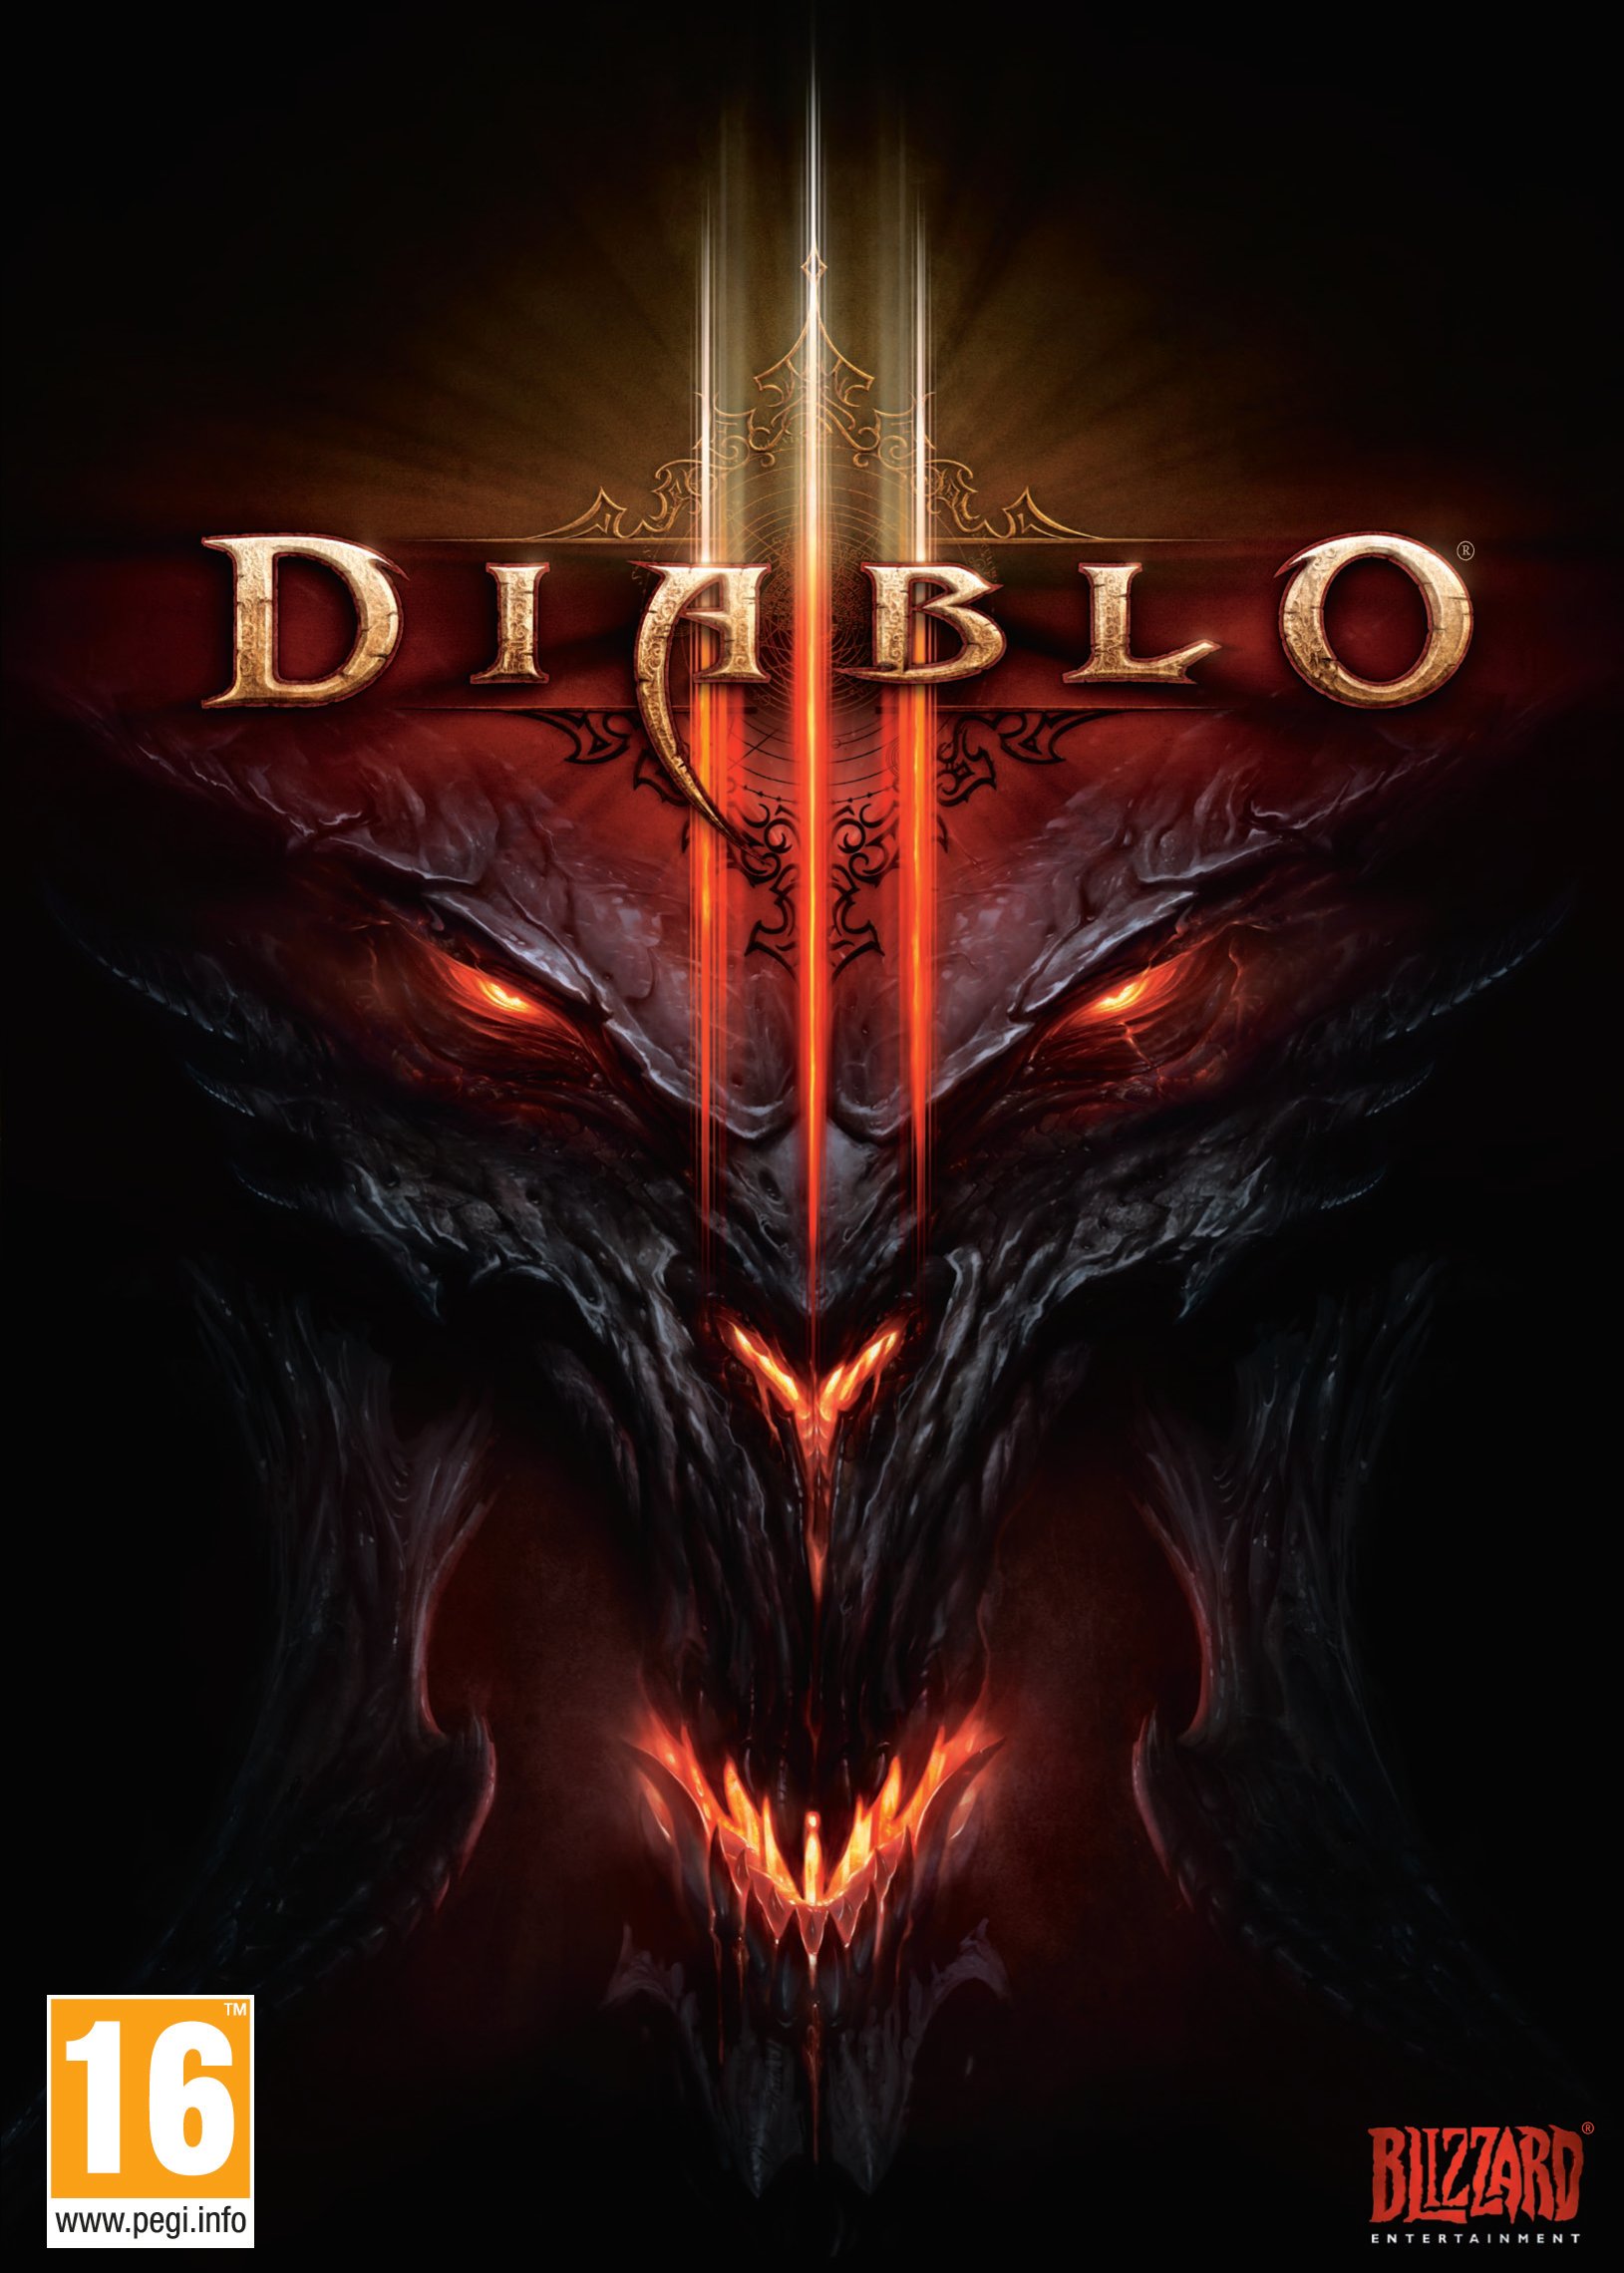 if i have diablo 3 on pc can i play on ps4